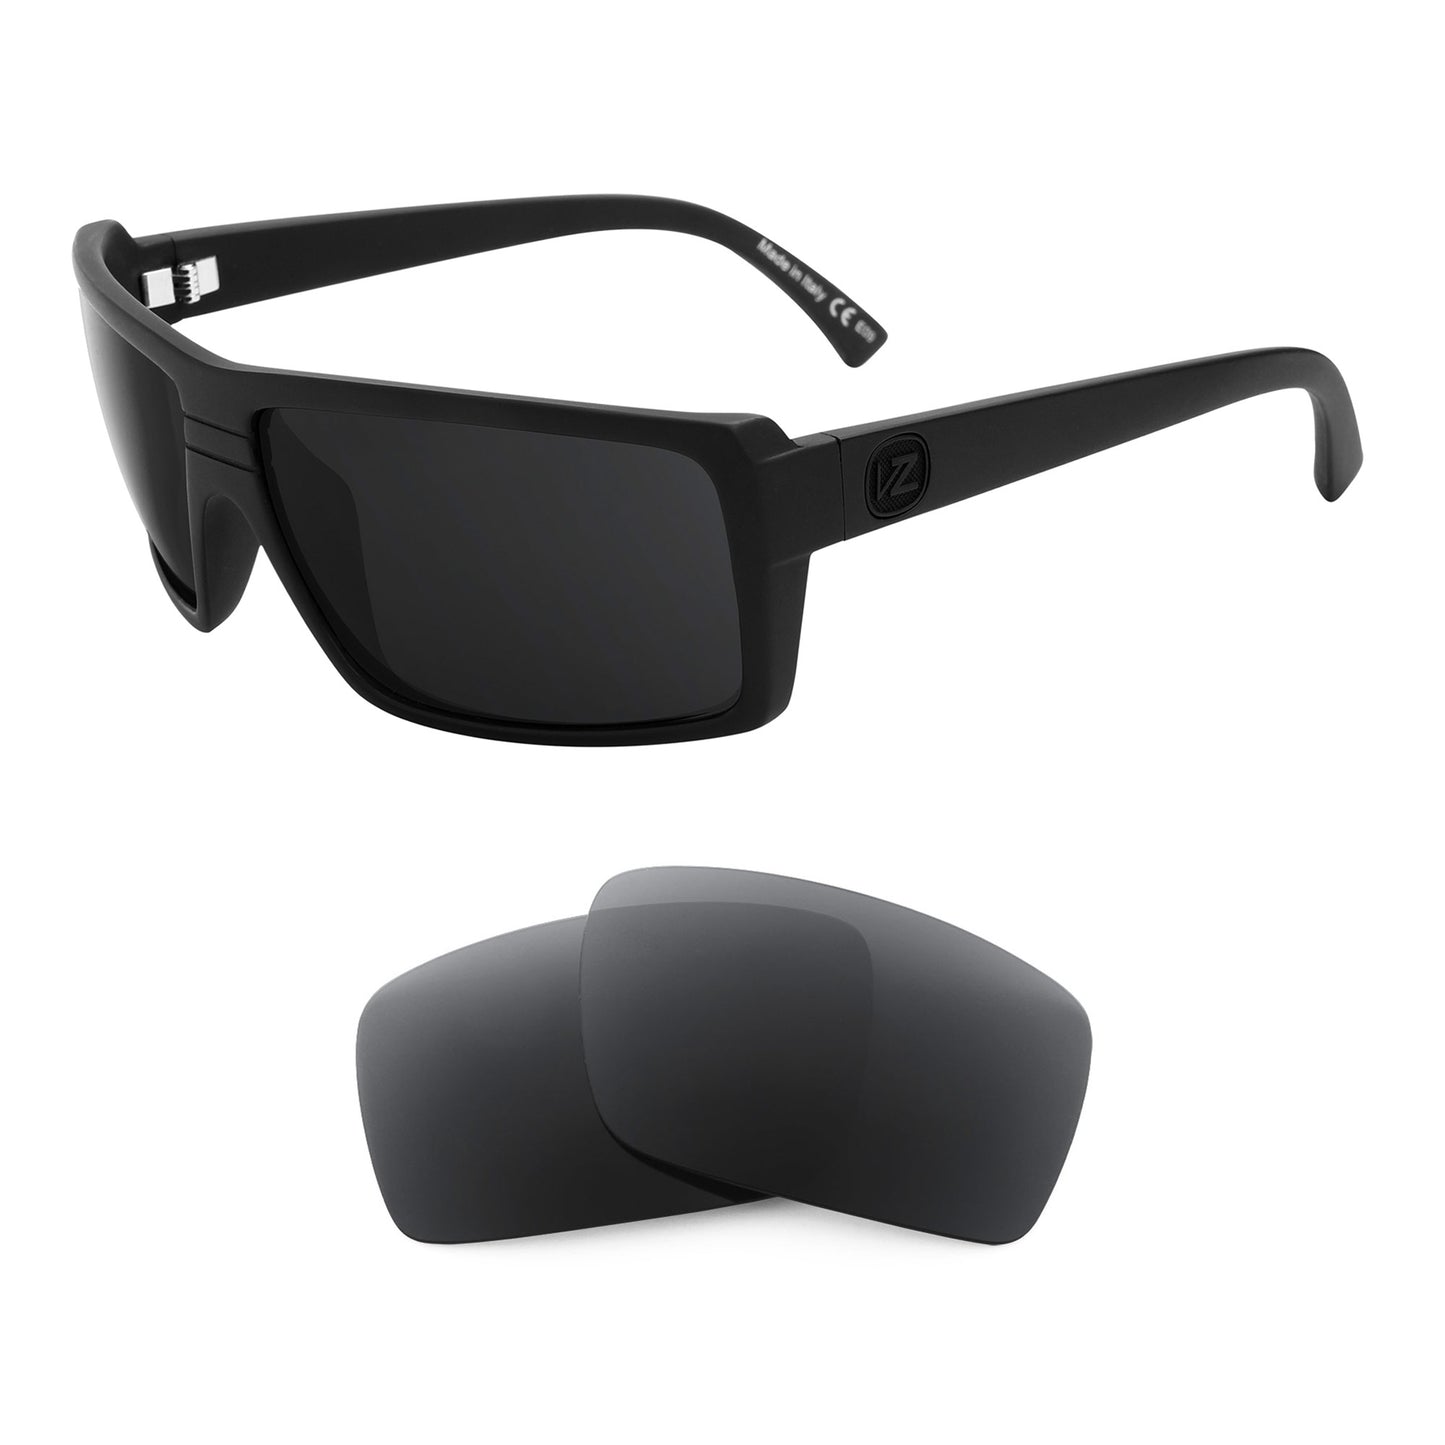 VonZipper Snark sunglasses with replacement lenses